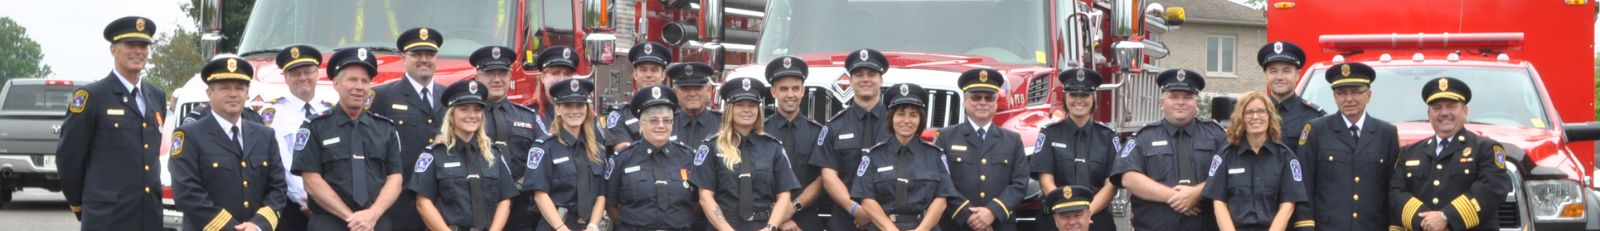 Group of Trent Lakes firefighters standing in front of fire trucks.